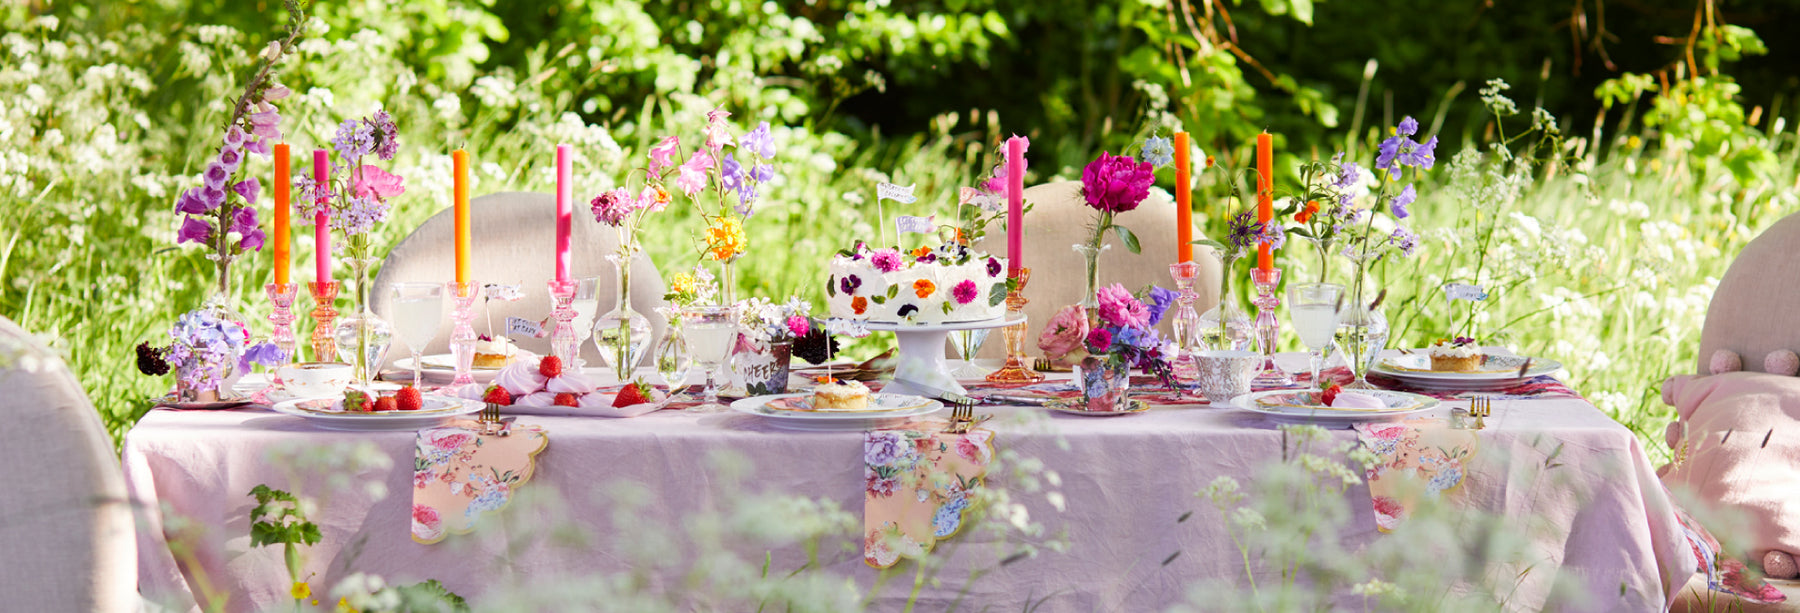 Afternoon Tea Decorations & Party Supplies - Talking Tables UK